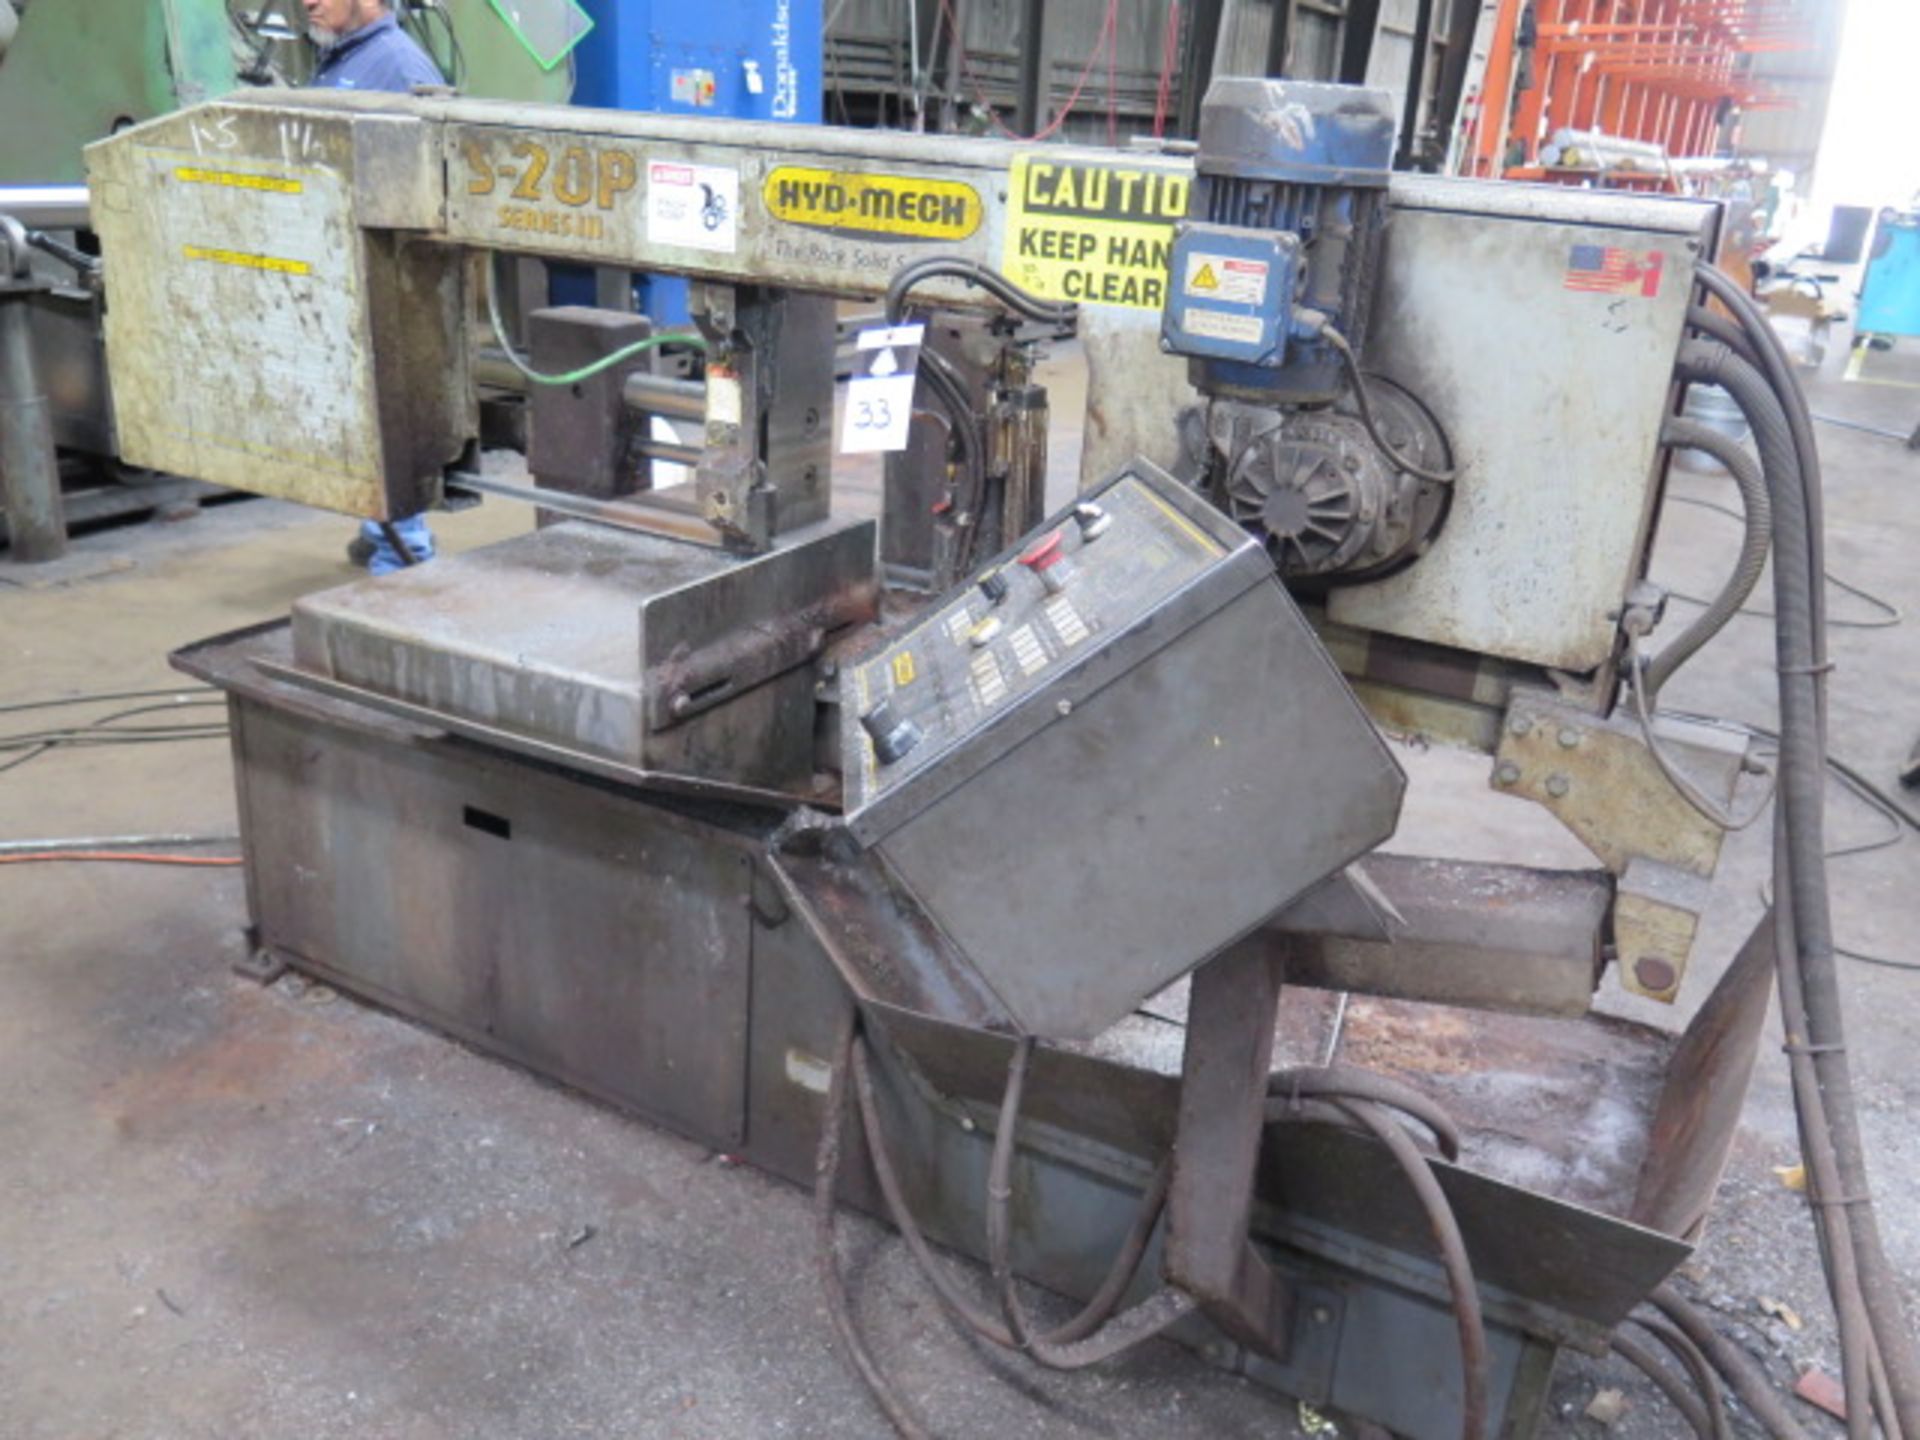 Hyd-Mech S-20P Series III 13” Horizontal Band Saw w/ Hyd-Mech Controls, Hyd Clamping, SOLD AS IS - Bild 2 aus 11